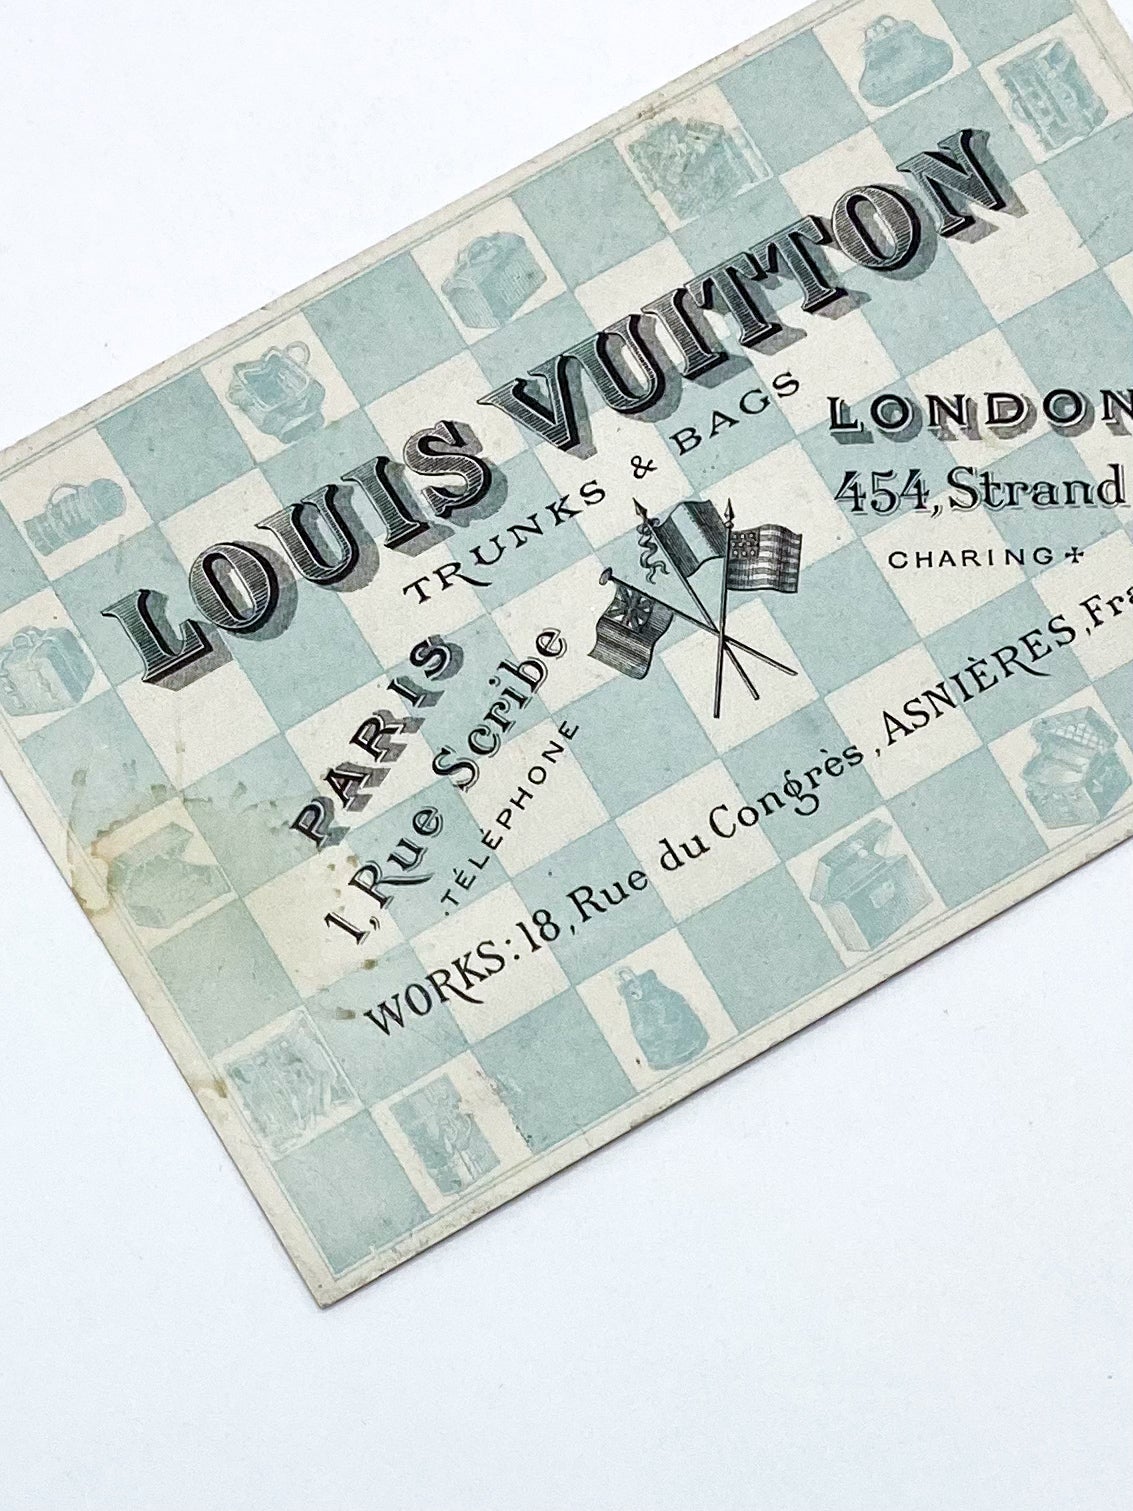 Louis Vuitton Book Indiana Antiquarian & Collectible Books for